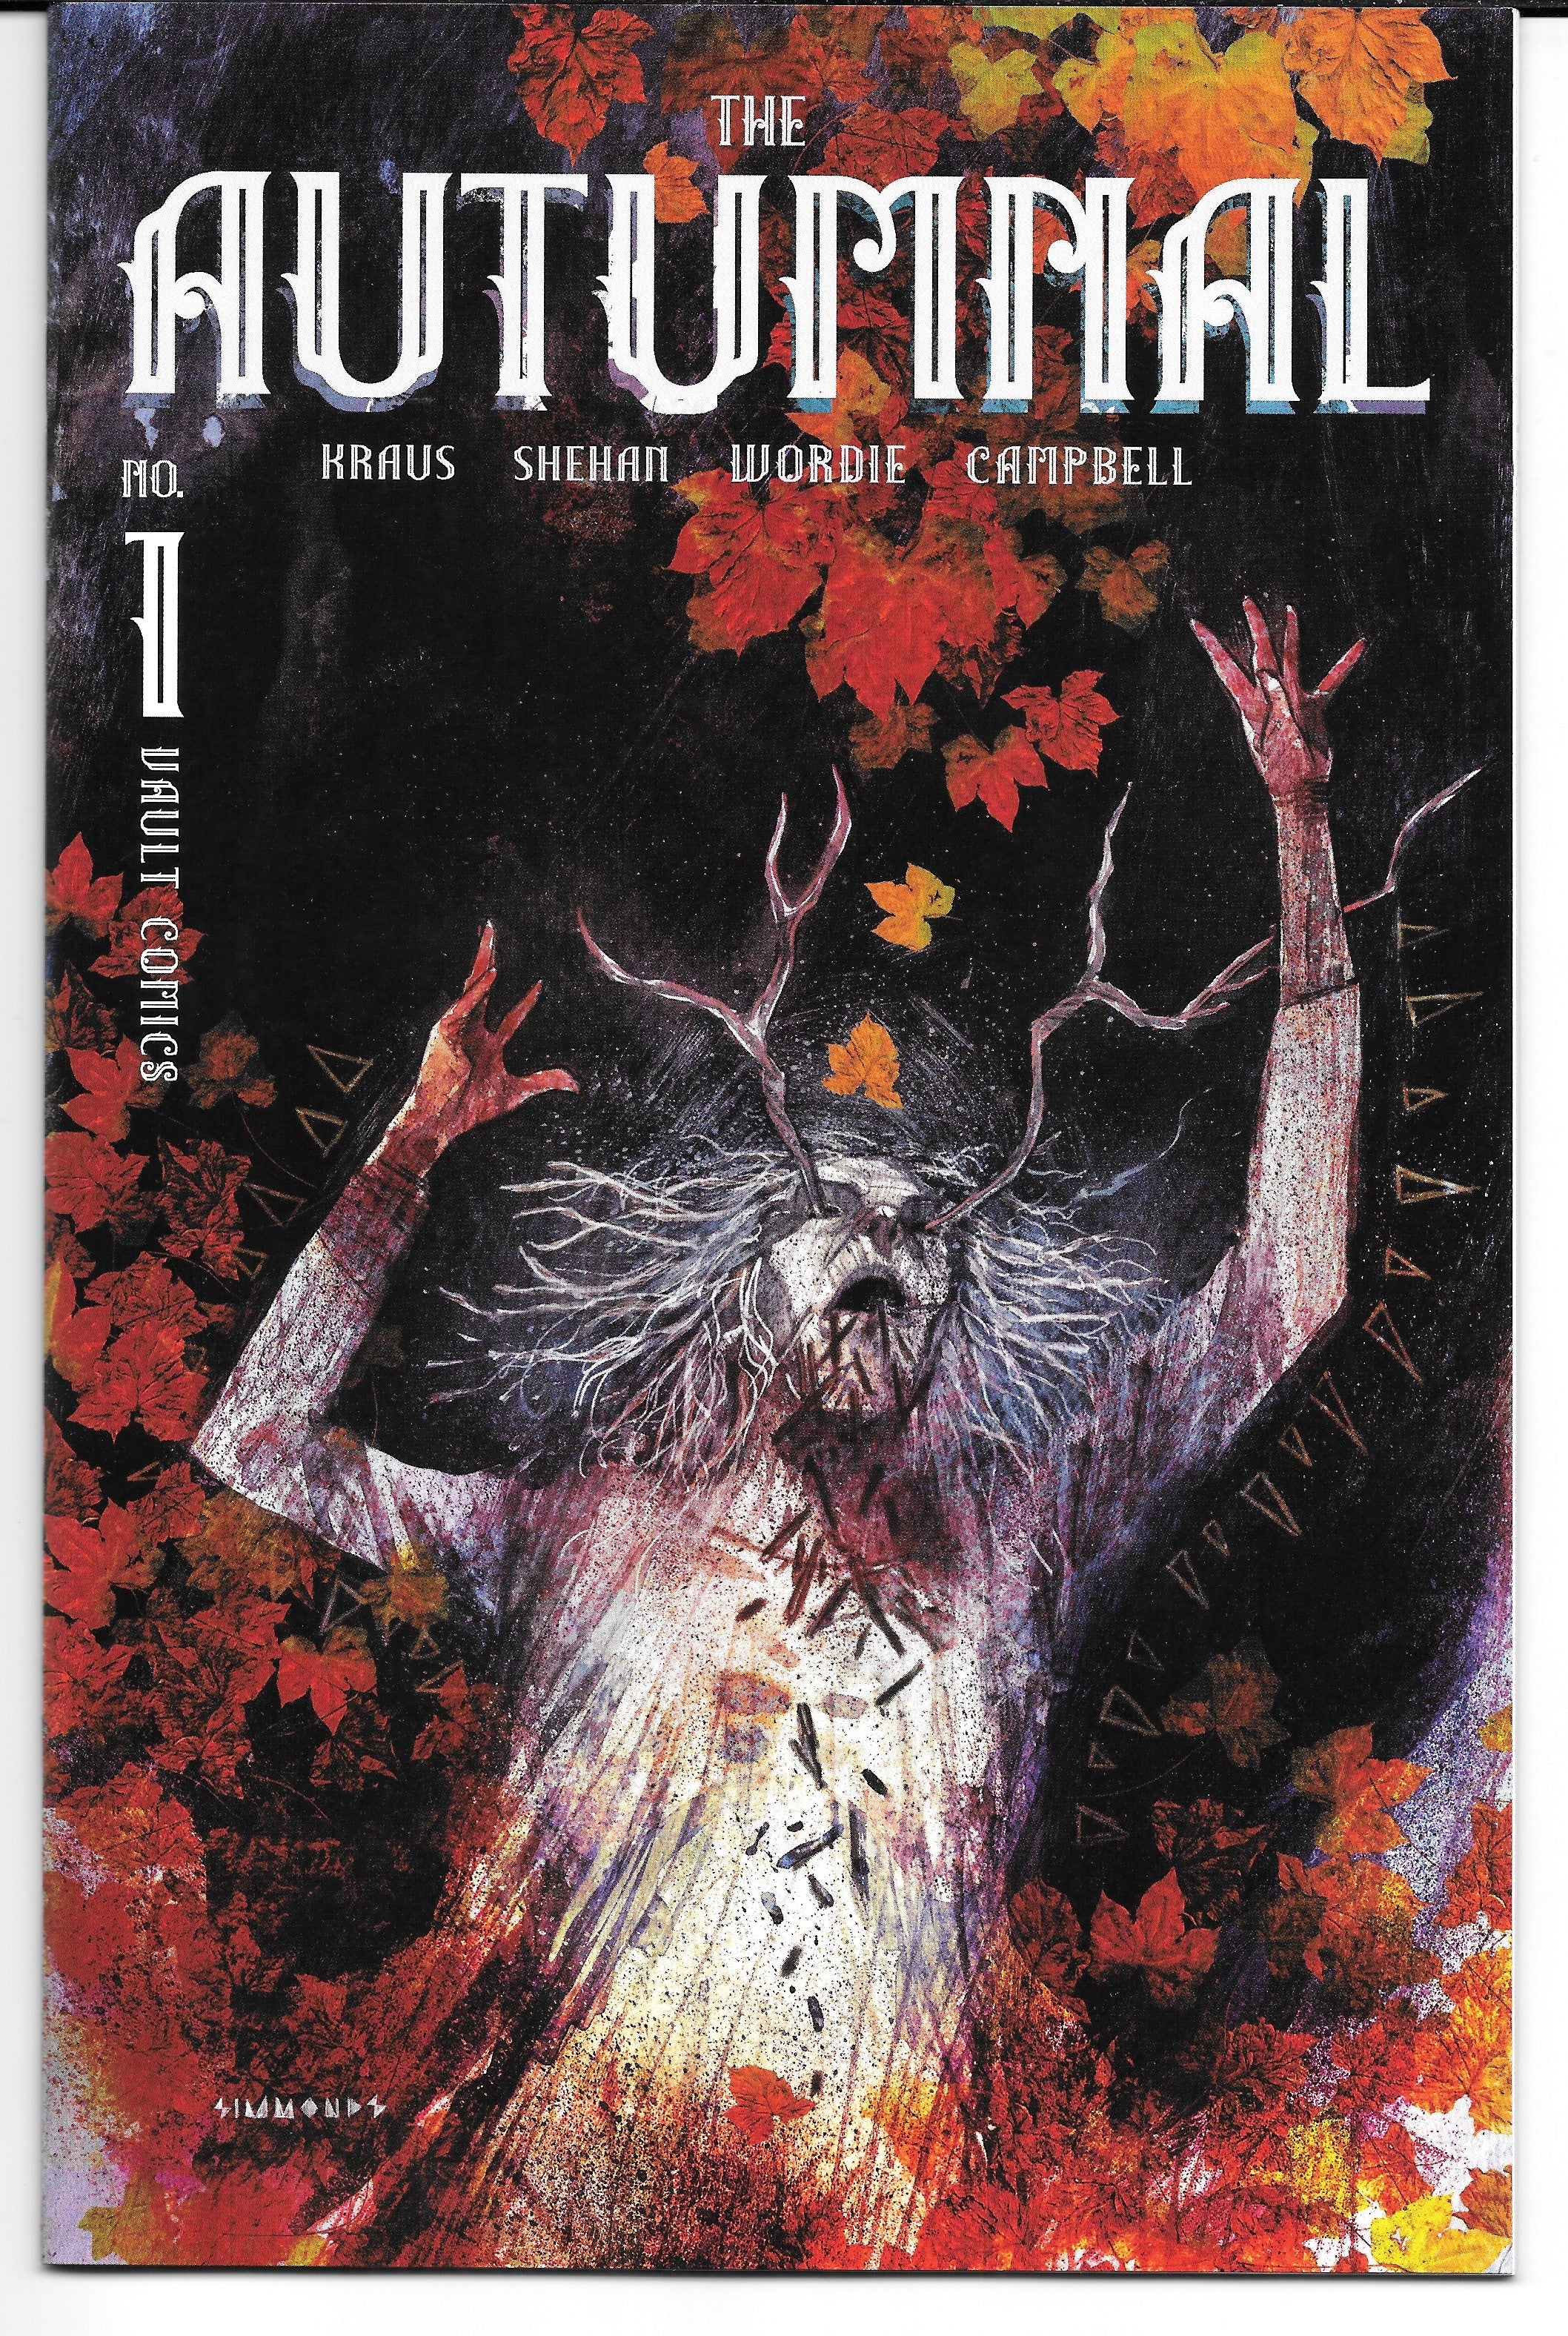 Photo of Autumnal (2020) Issue 1E - Near Mint Comic sold by Stronghold Collectibles